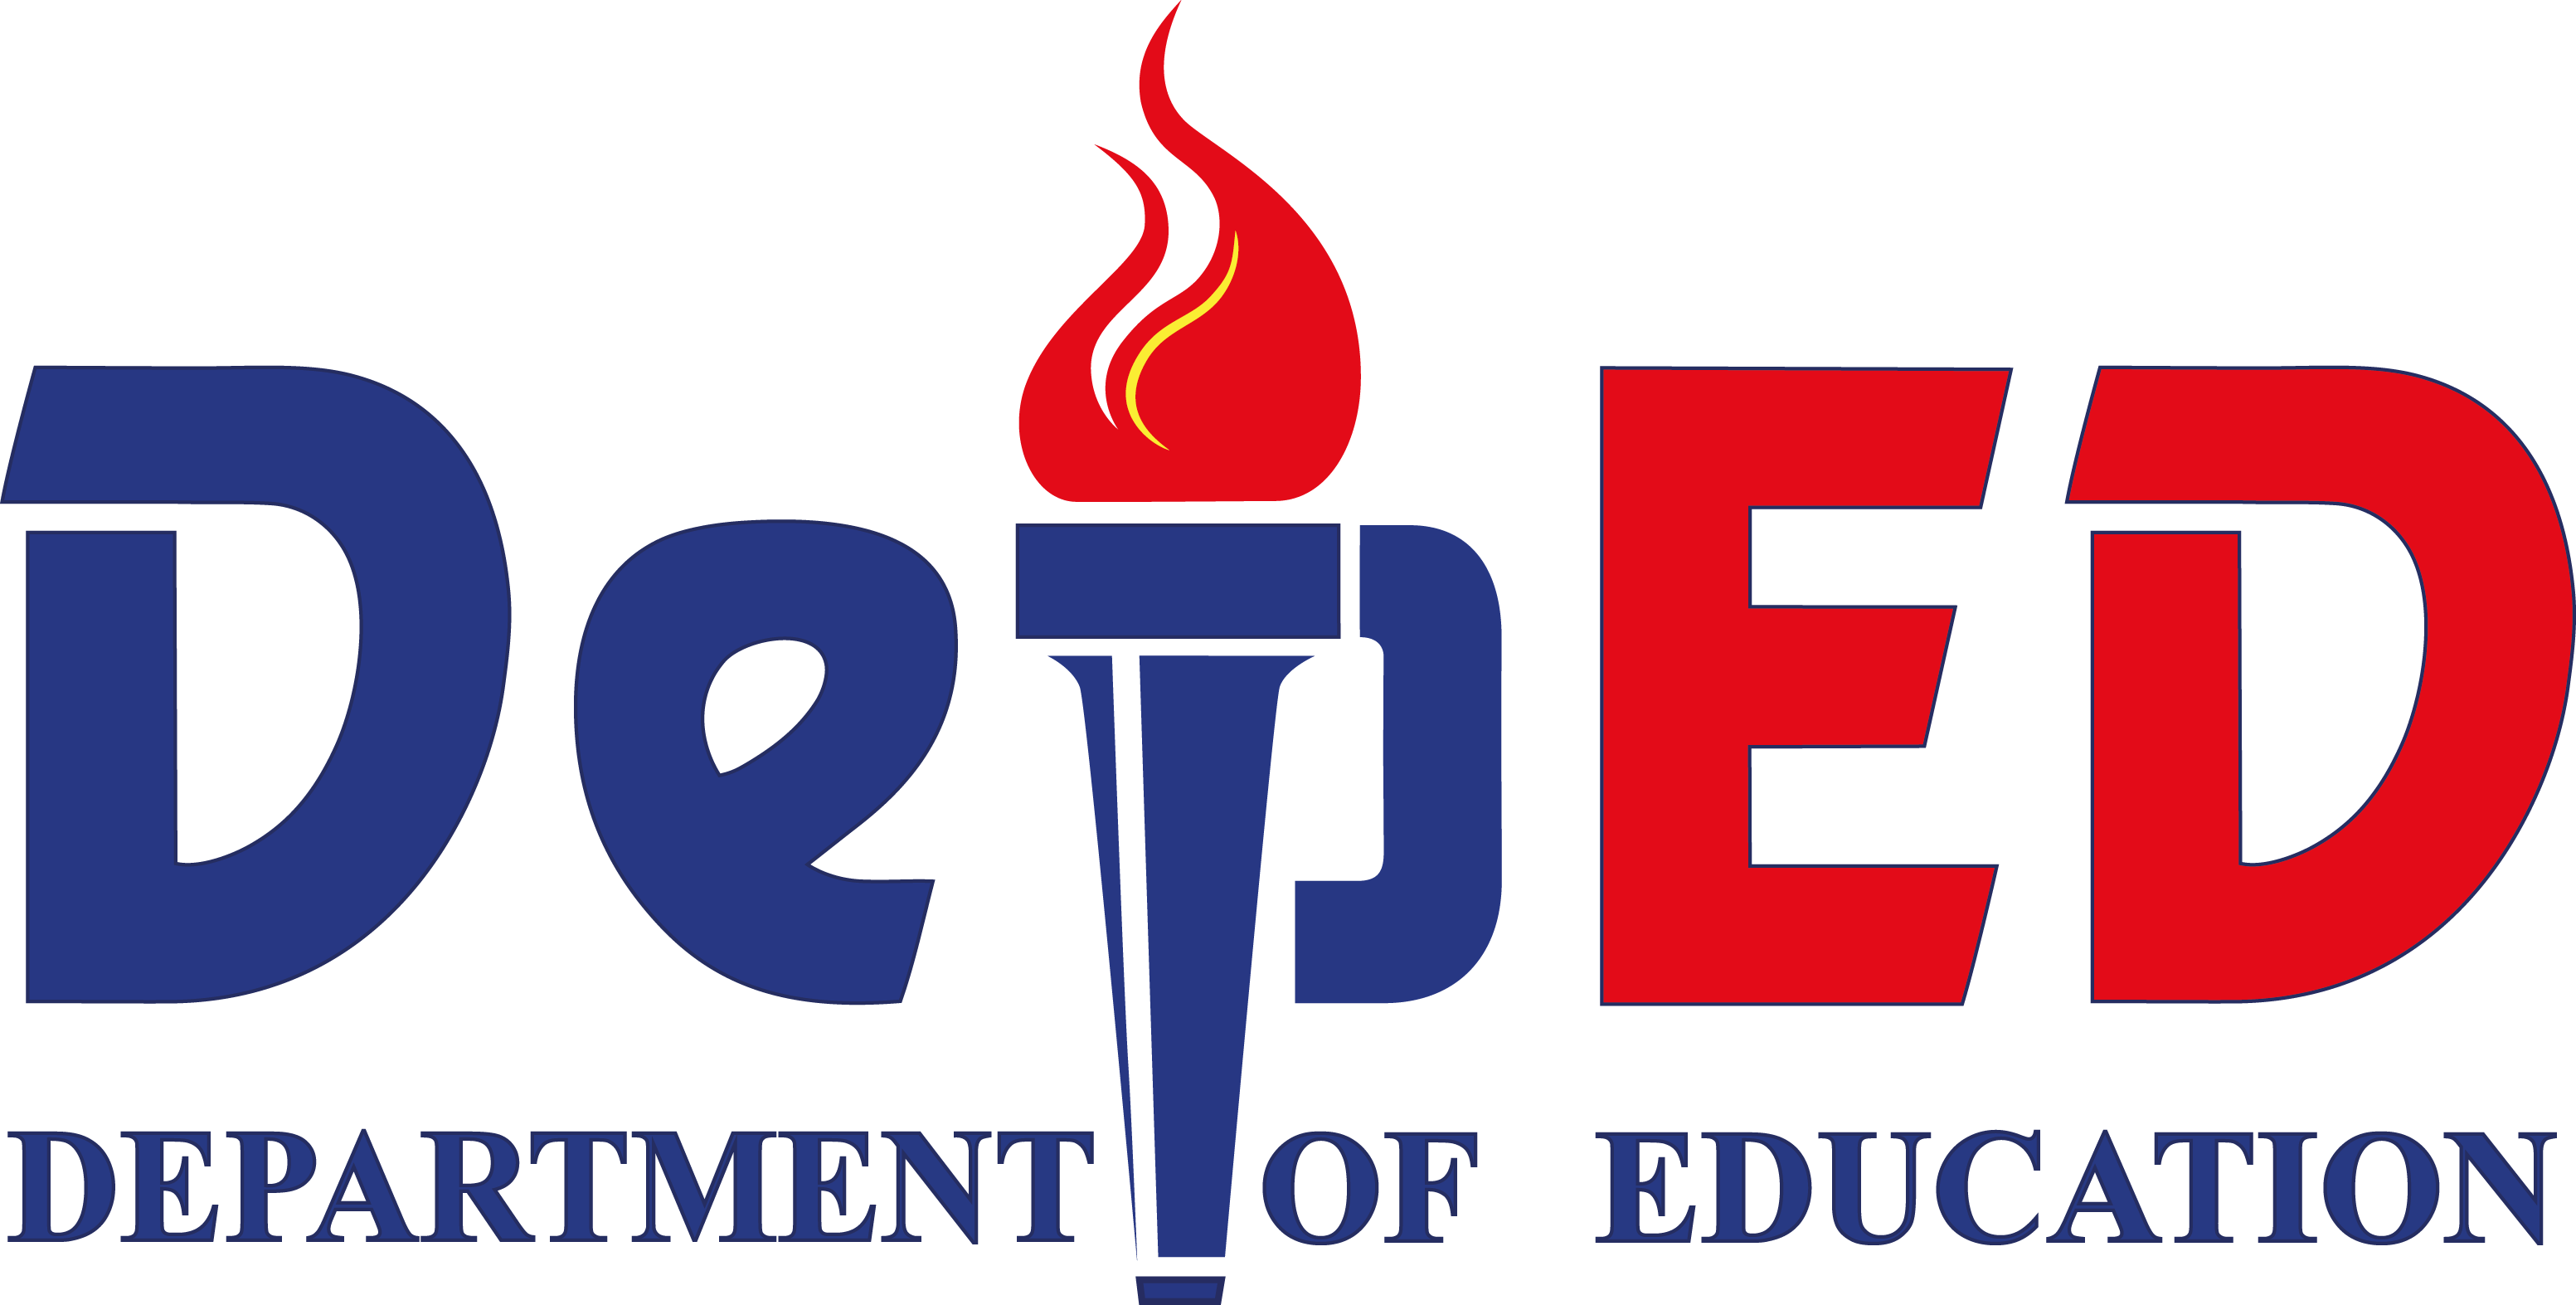 Republic of the Philippines - Department of Education